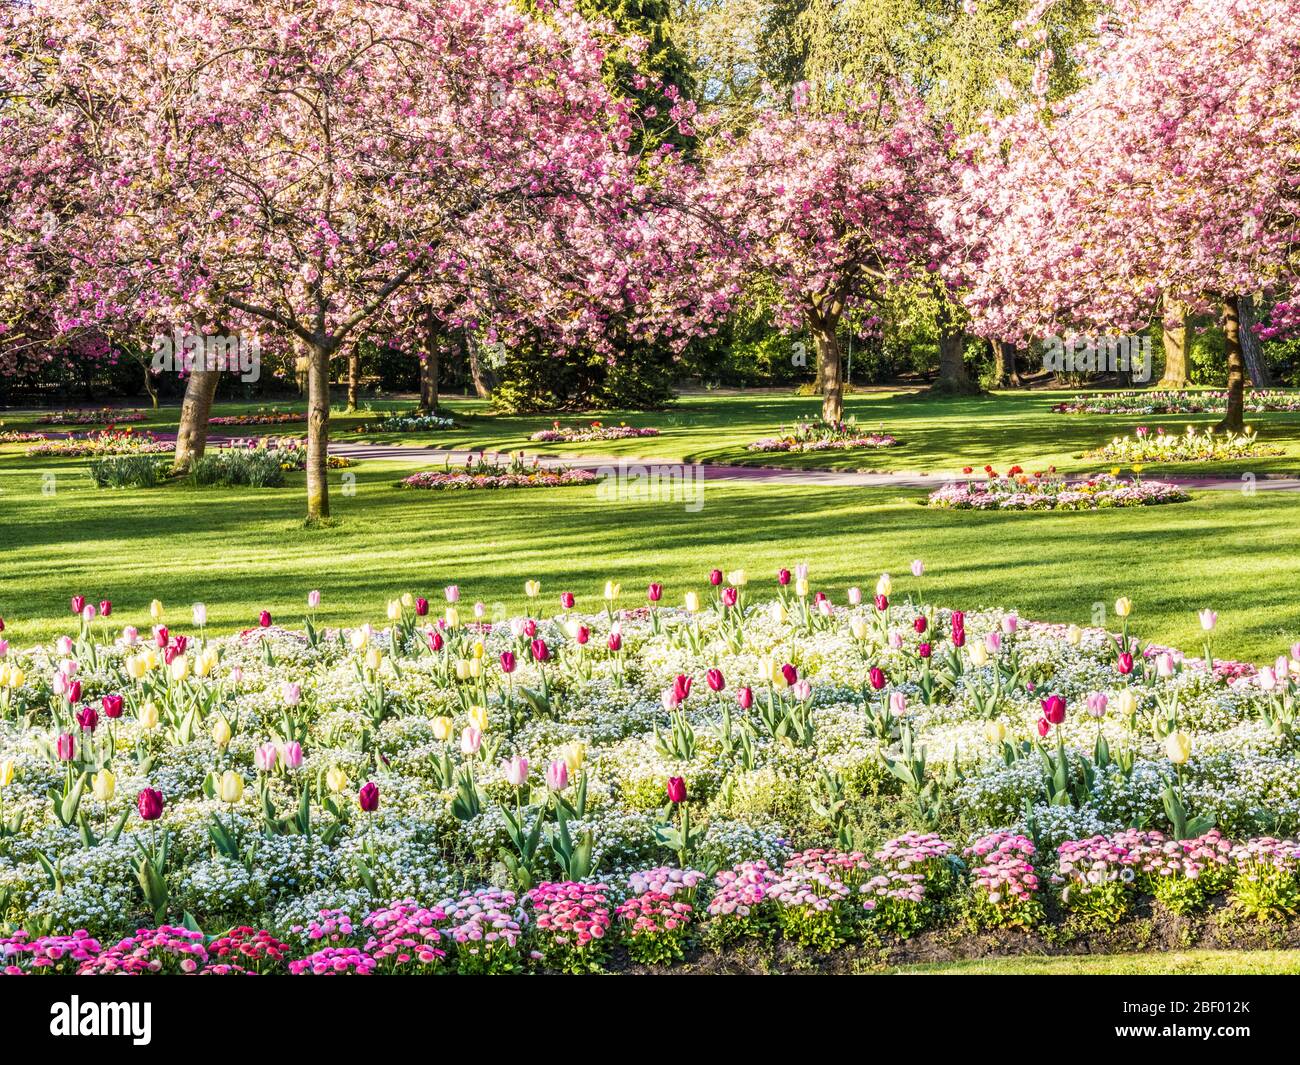 A bed of tulips, white alyssum and pink Bellis daisies with flowering pink cherry trees in the background in an urban public park in England. Stock Photo